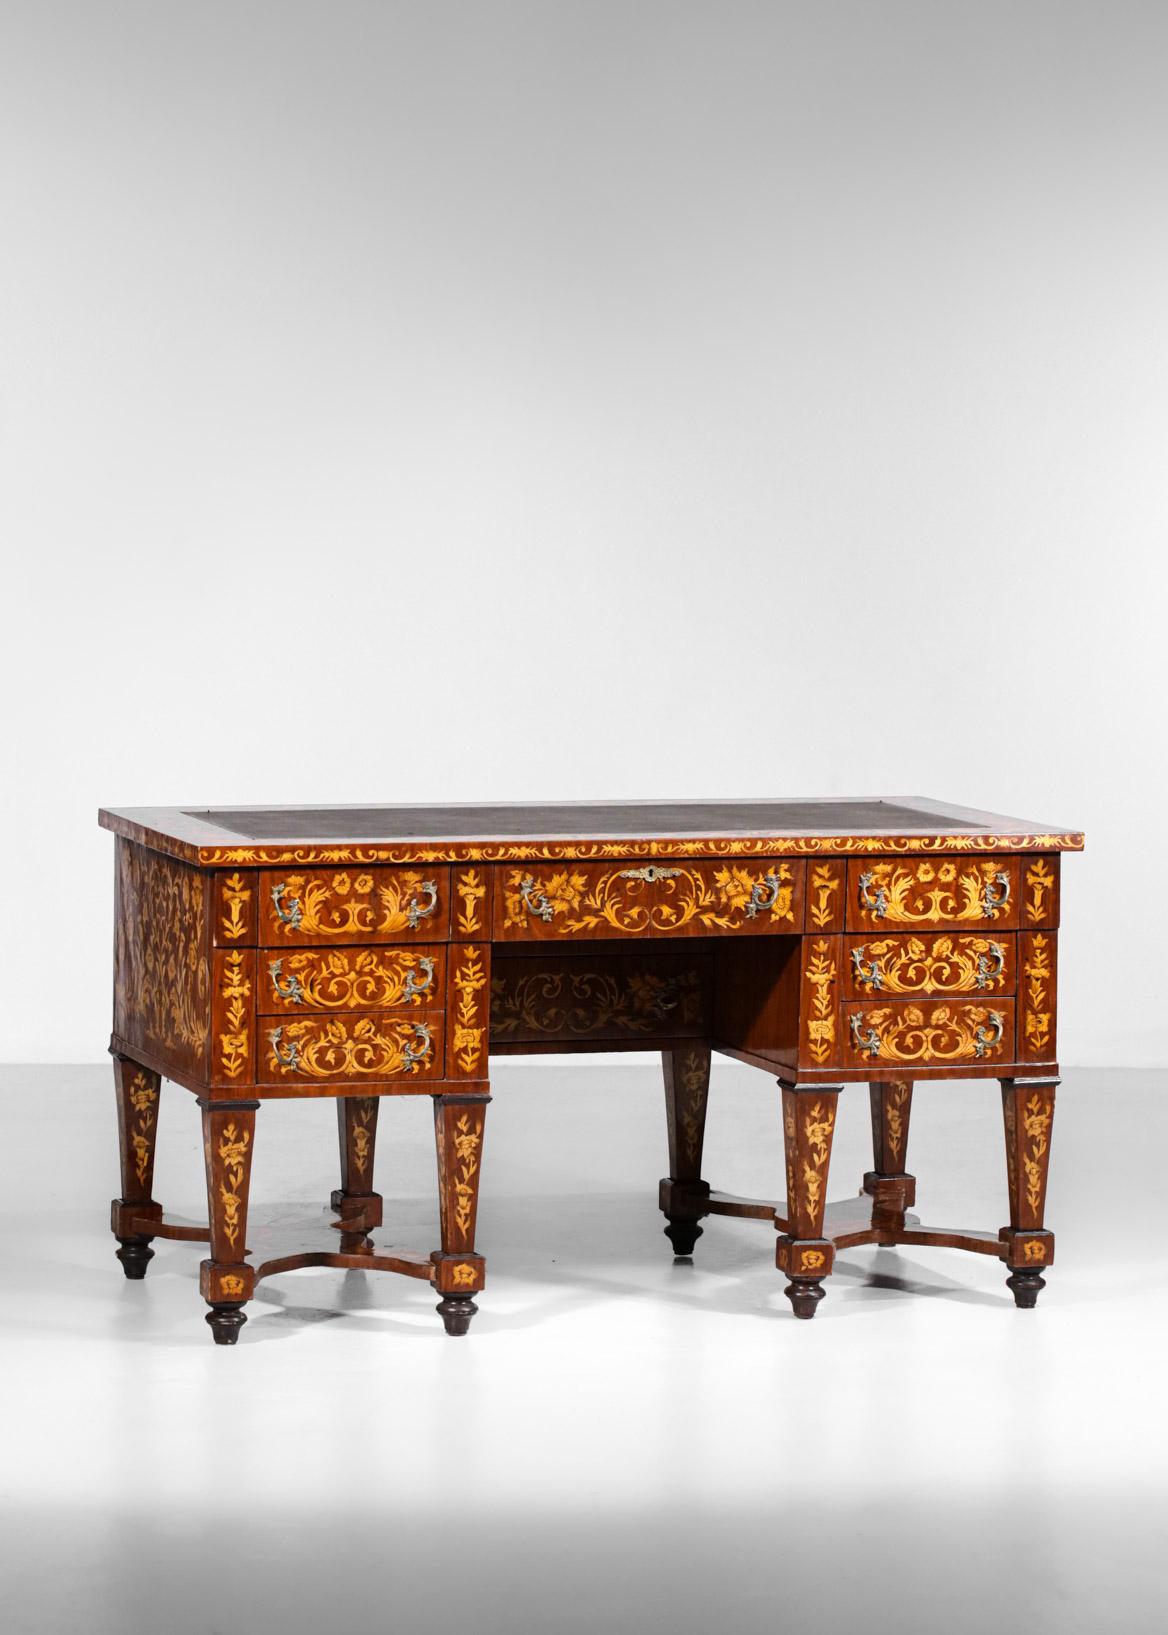 Mazarin Style Desk in Solid Wood and Floral Marquetry, F419 1